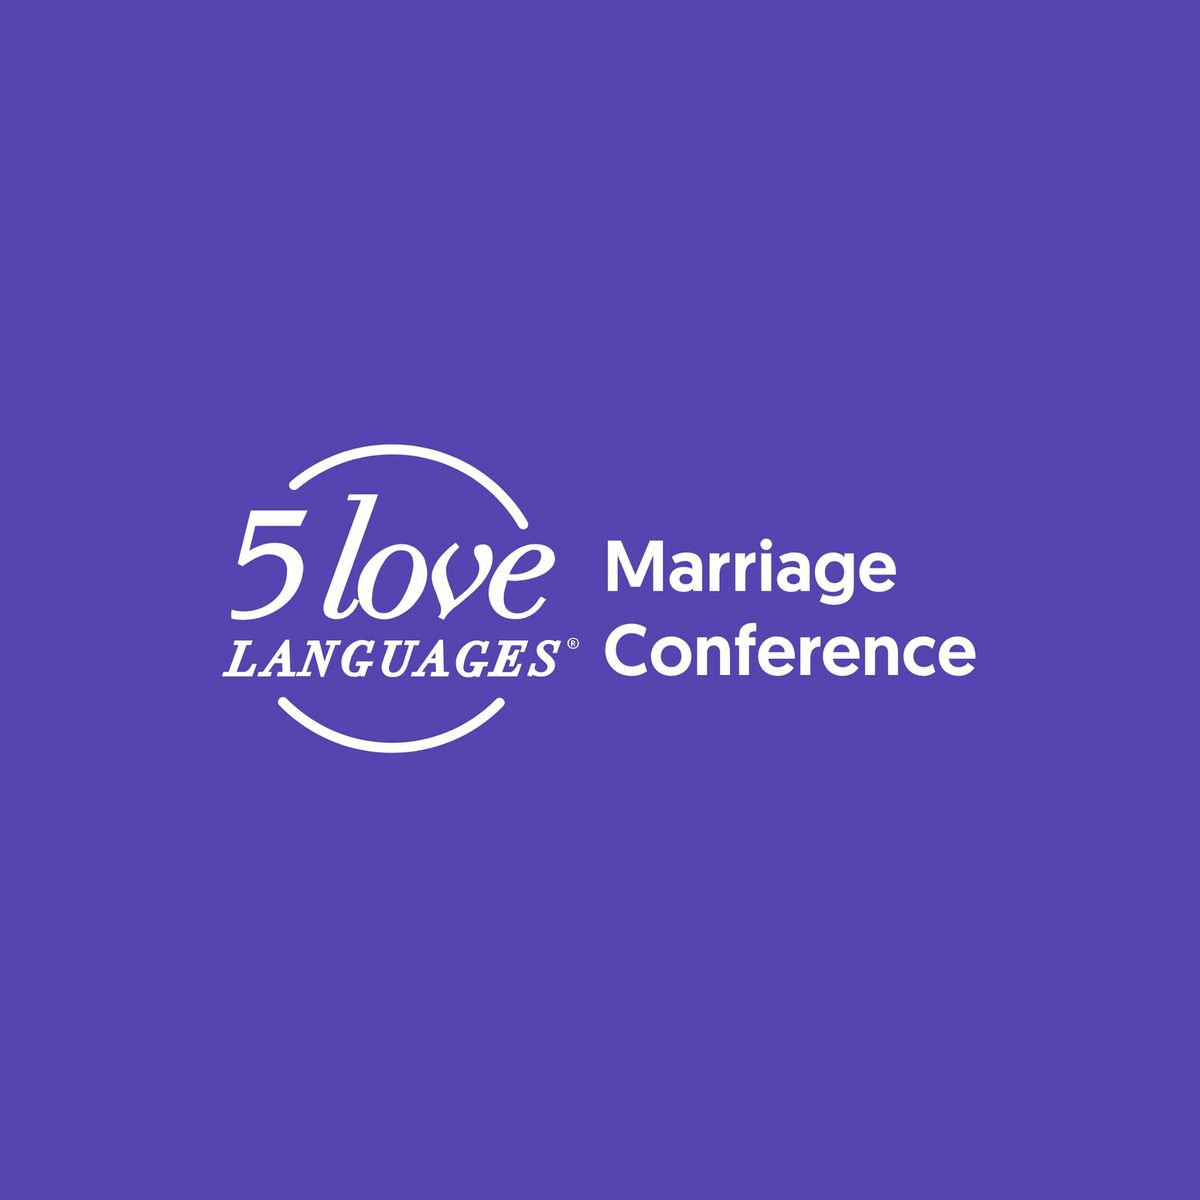 The 5 Love Languages Marriage Conference - Anchorage, AK